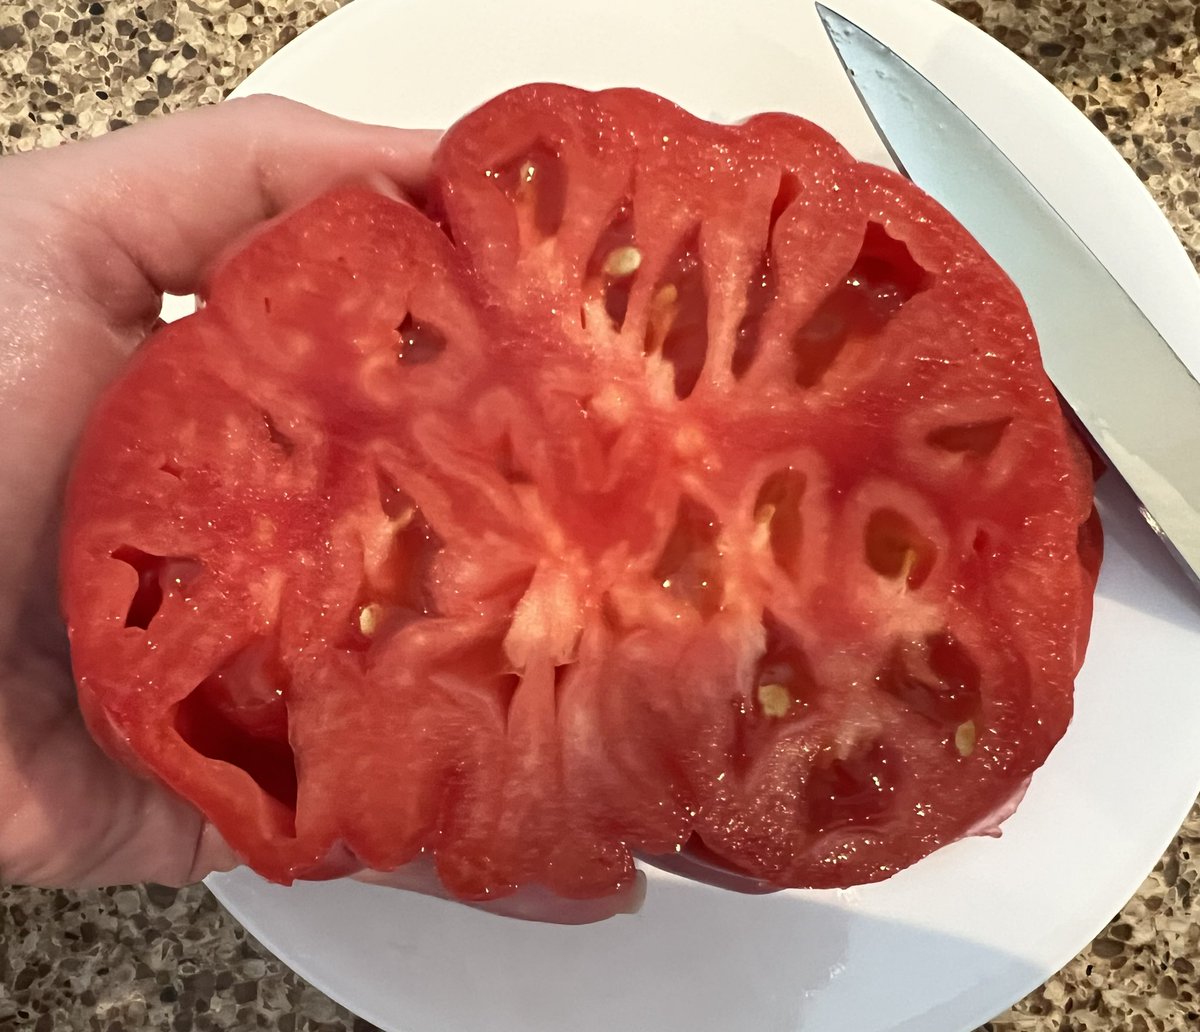 I love heirloom tomatoes, but this one is giving me flashbacks to university neuroanatomy classes 🧠